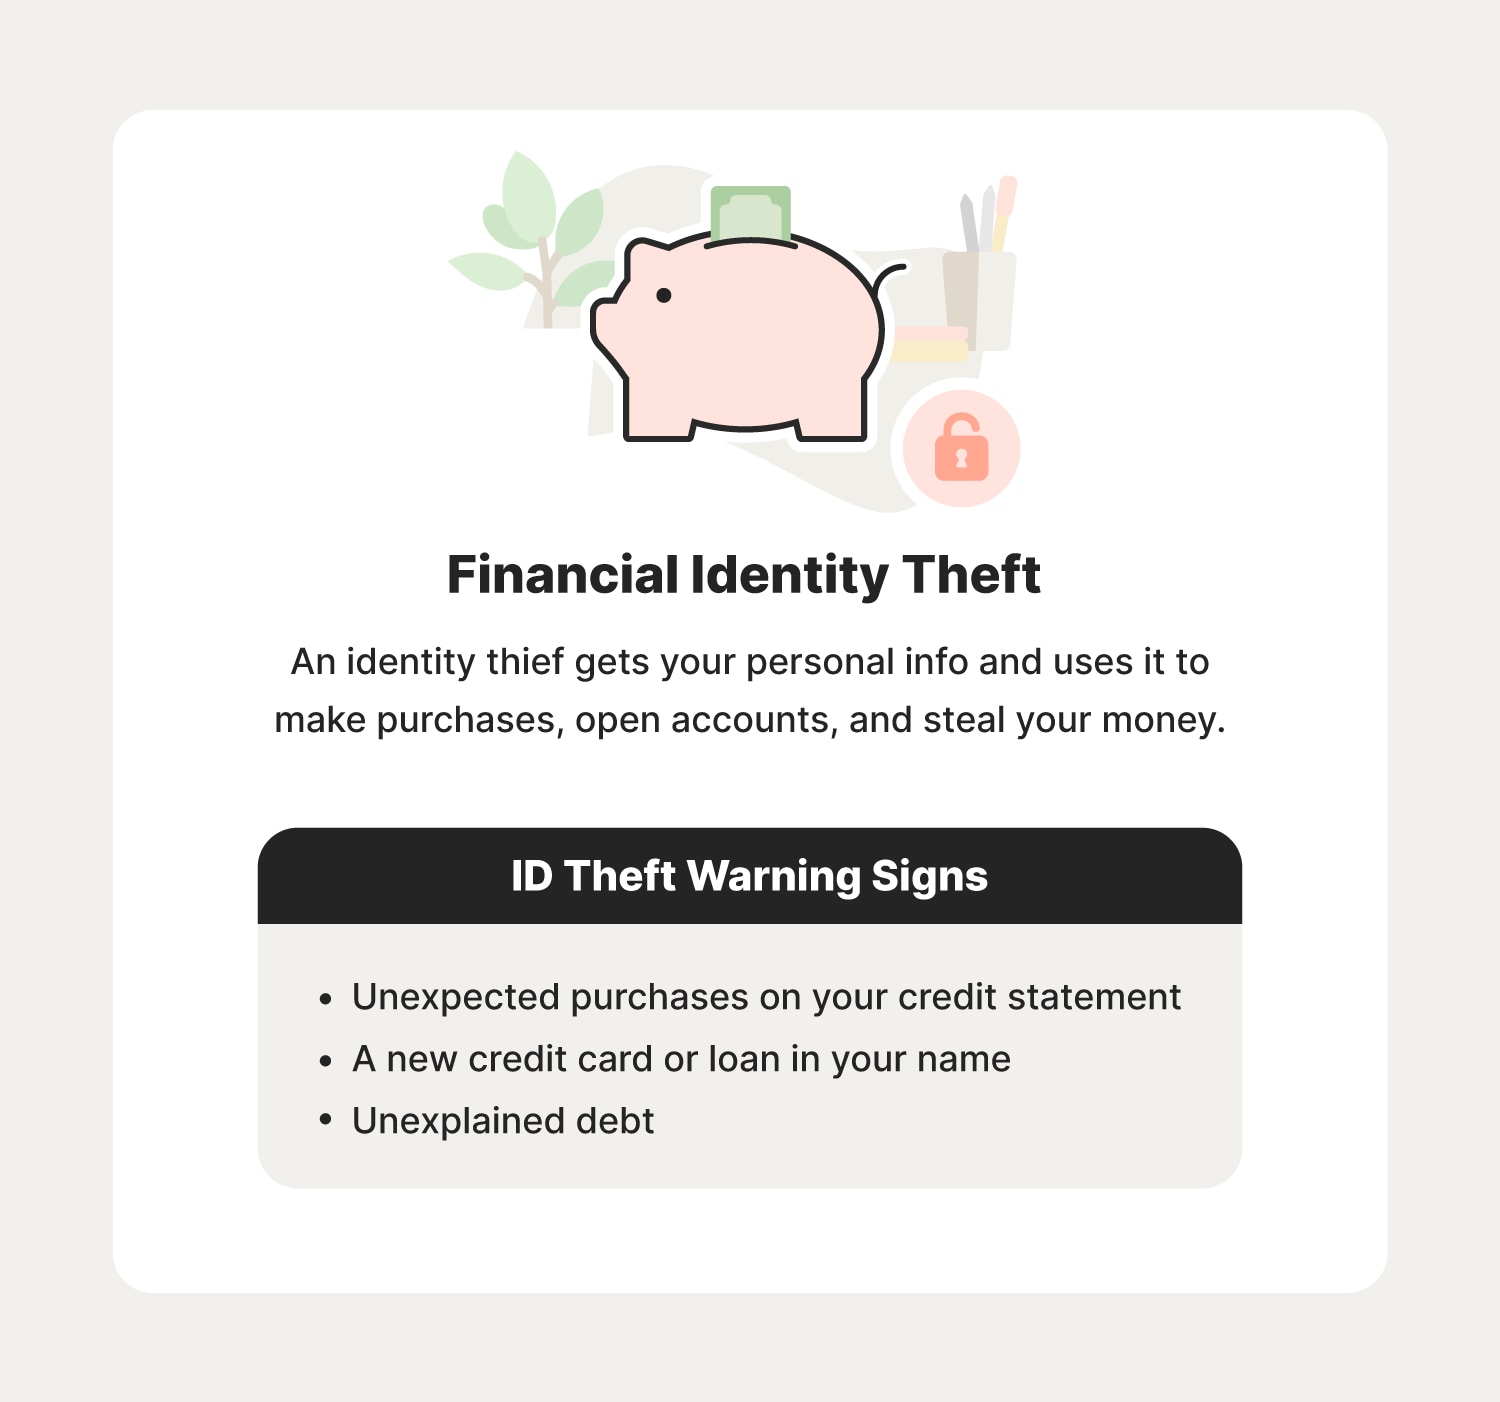 Illustrated chart with information about financial identity theft and some warning signs to look out for.